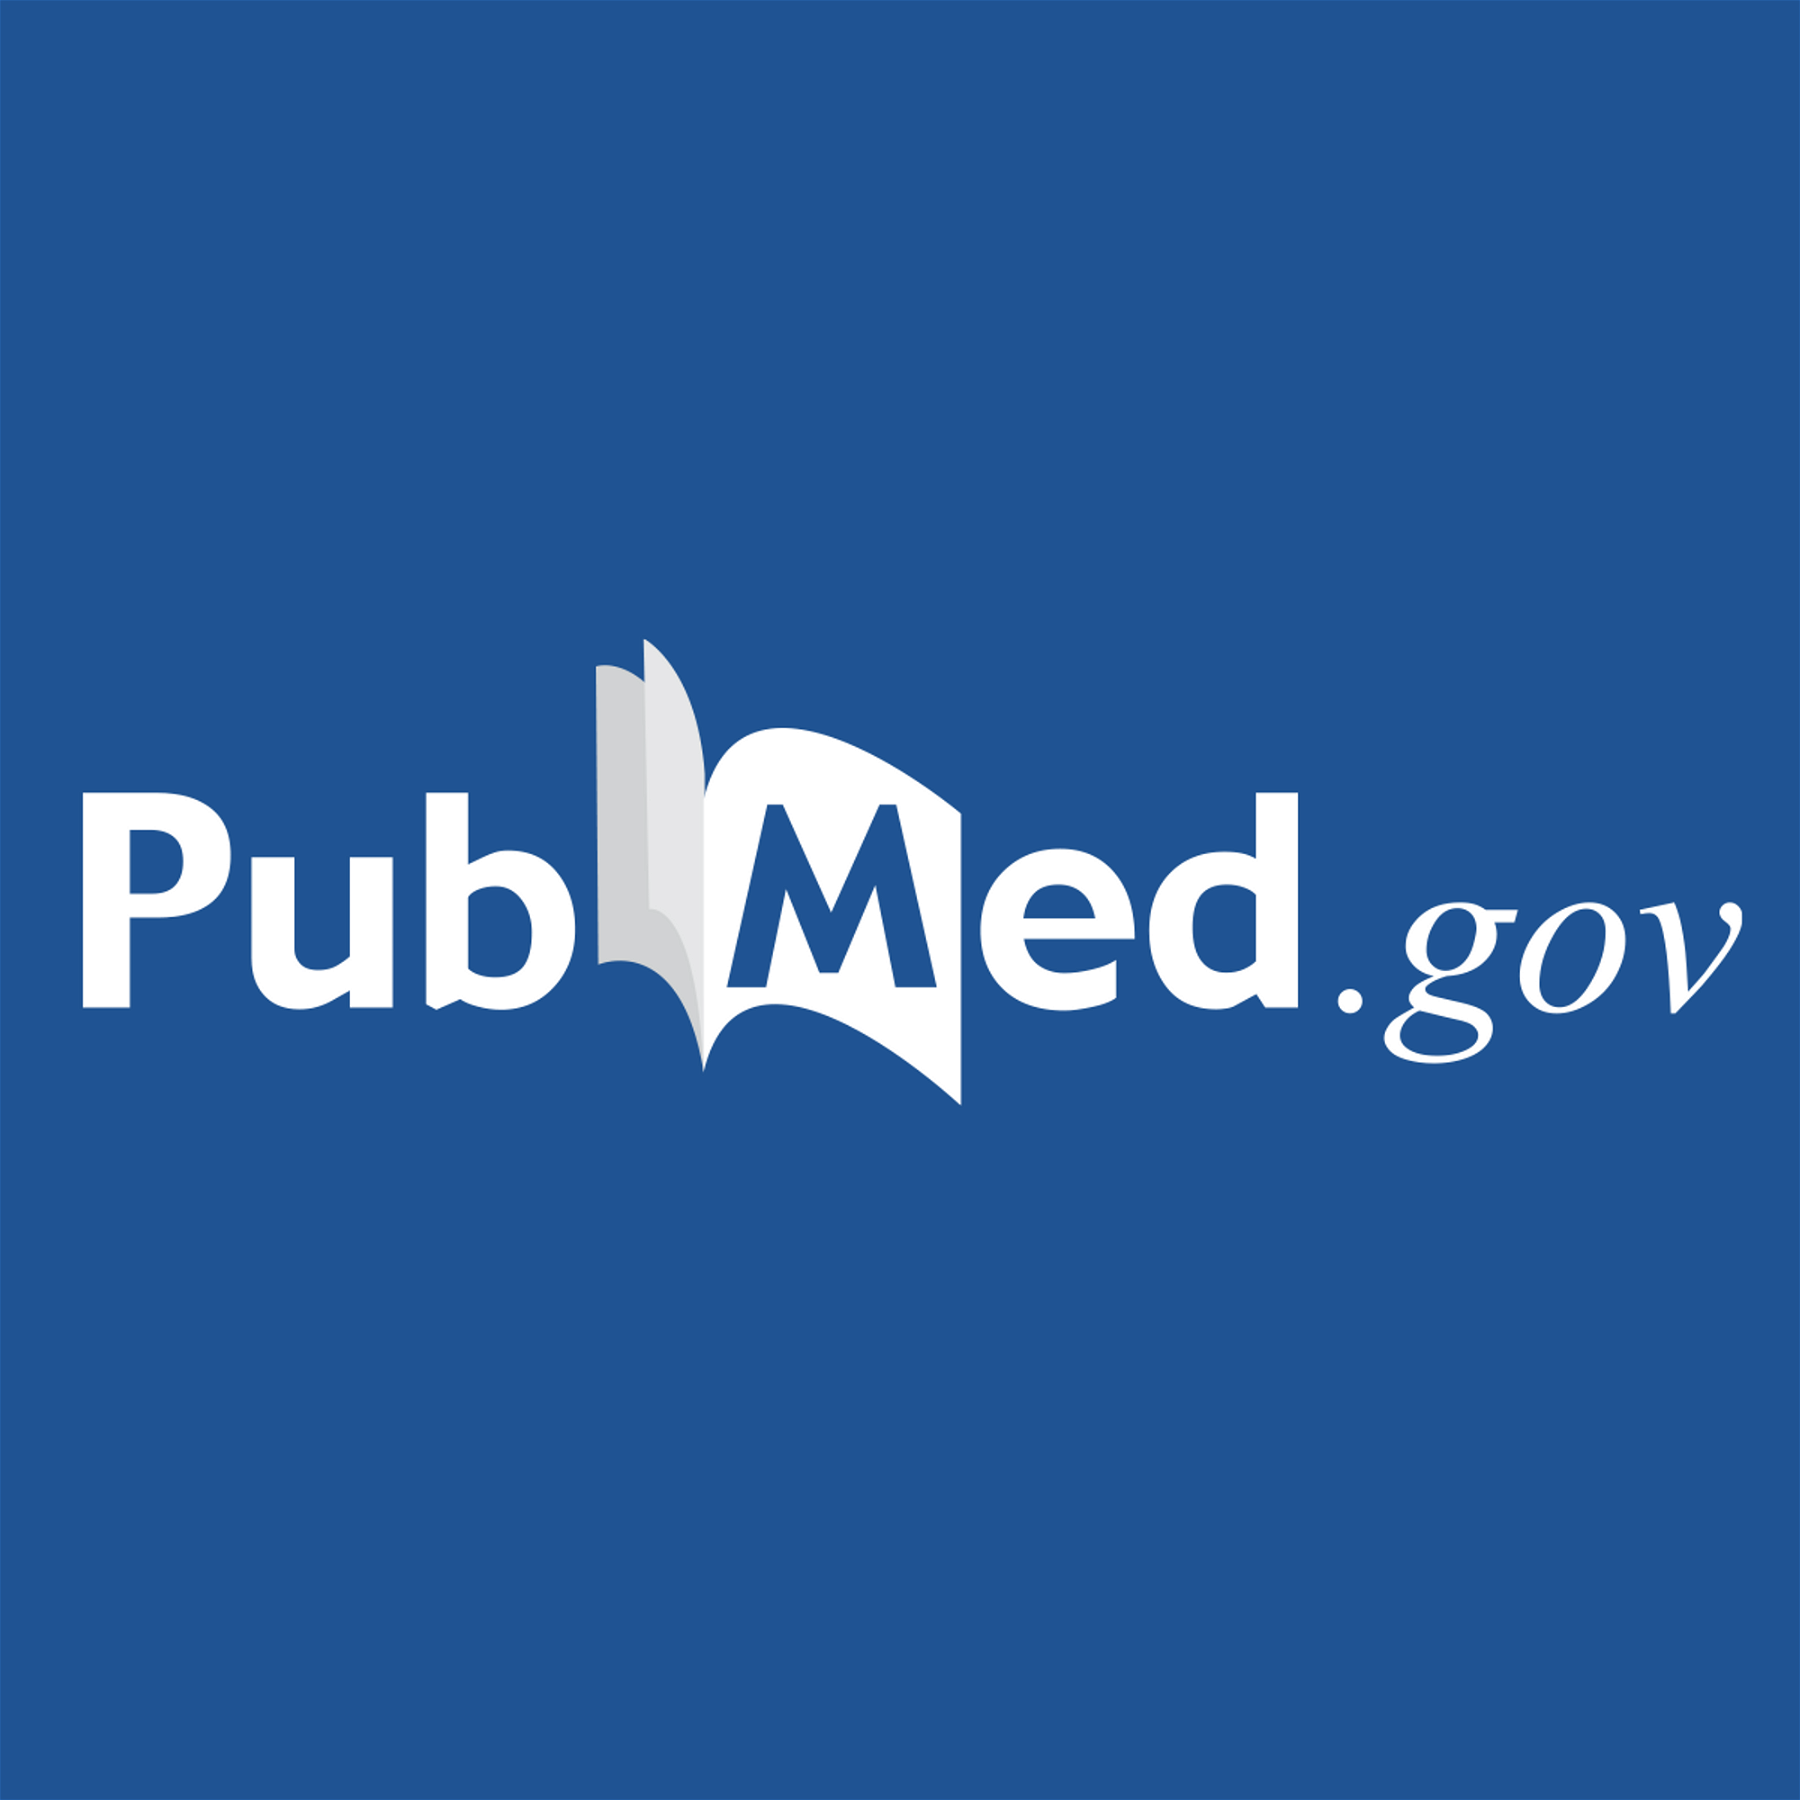 Prevalence and Diagnosis of Neurological Disorders Using Different Deep Learning Techniques: A Meta-Analysis - PubMed